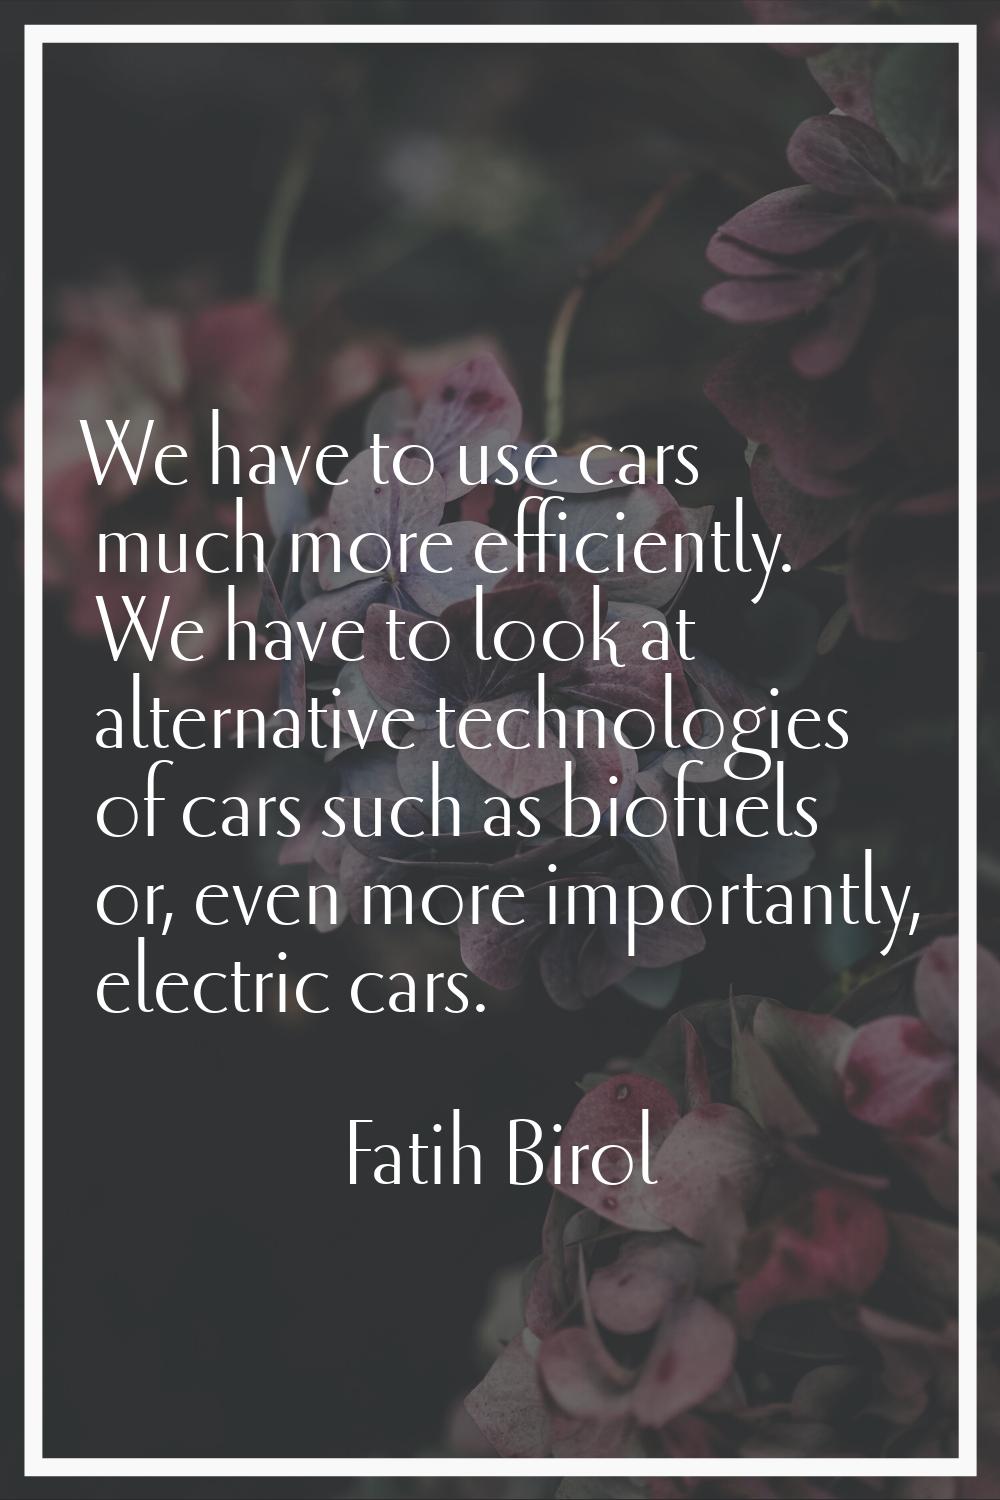 We have to use cars much more efficiently. We have to look at alternative technologies of cars such